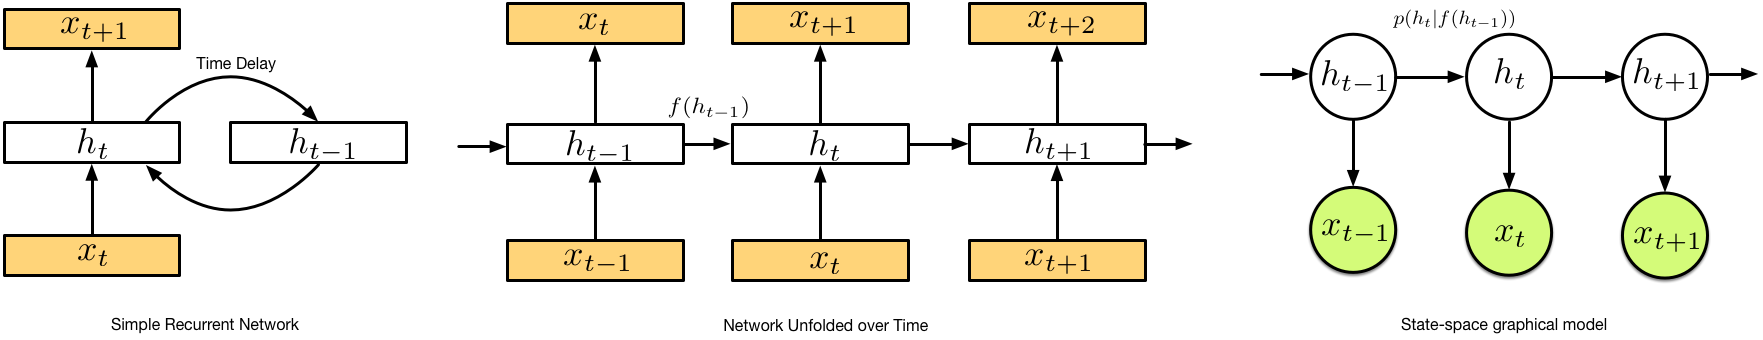 Equivalent models: recurrent networks and state-space models.